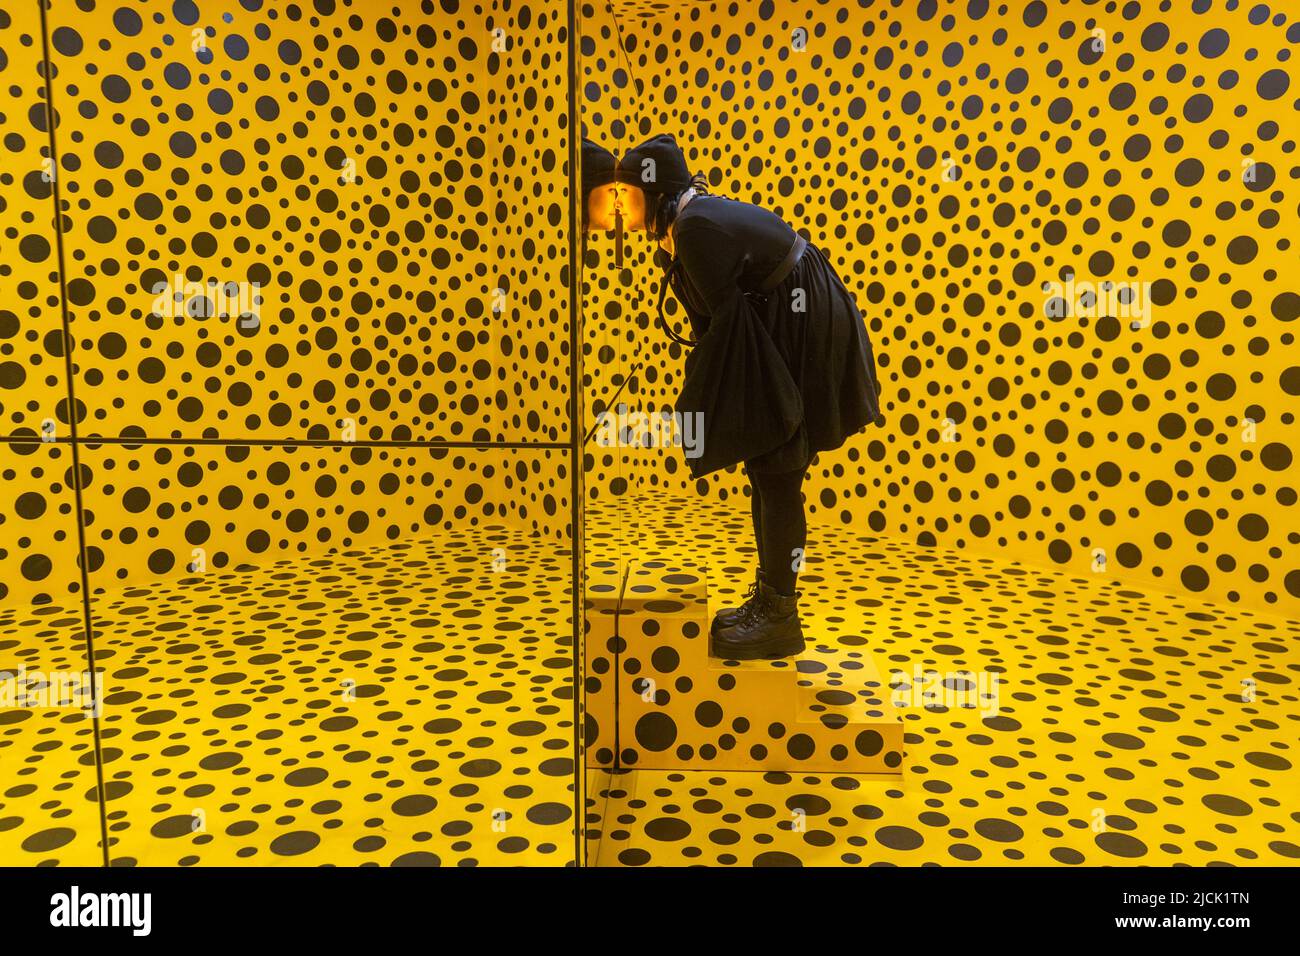 https://c8.alamy.com/comp/2JCK1TN/adelaide-australia-14-june-2022-the-spirit-of-the-pumpkins-descended-into-the-heavens-exhibition-by-japanese-artist-yayoi-kusama-at-the-gallery-of-south-australia-in-adelaide-an-immersive-installation-where-viewers-are-invited-to-a-peep-show-mirror-box-in-a-bright-yellow-room-overrun-with-black-dots-and-participate-in-an-experience-of-both-overwhelming-and-infinite-space-and-a-round-trip-from-the-microscopic-to-the-cosmic-the-exhibition-runs-until-april-2023-credit-amer-ghazzalalamy-live-news-2JCK1TN.jpg